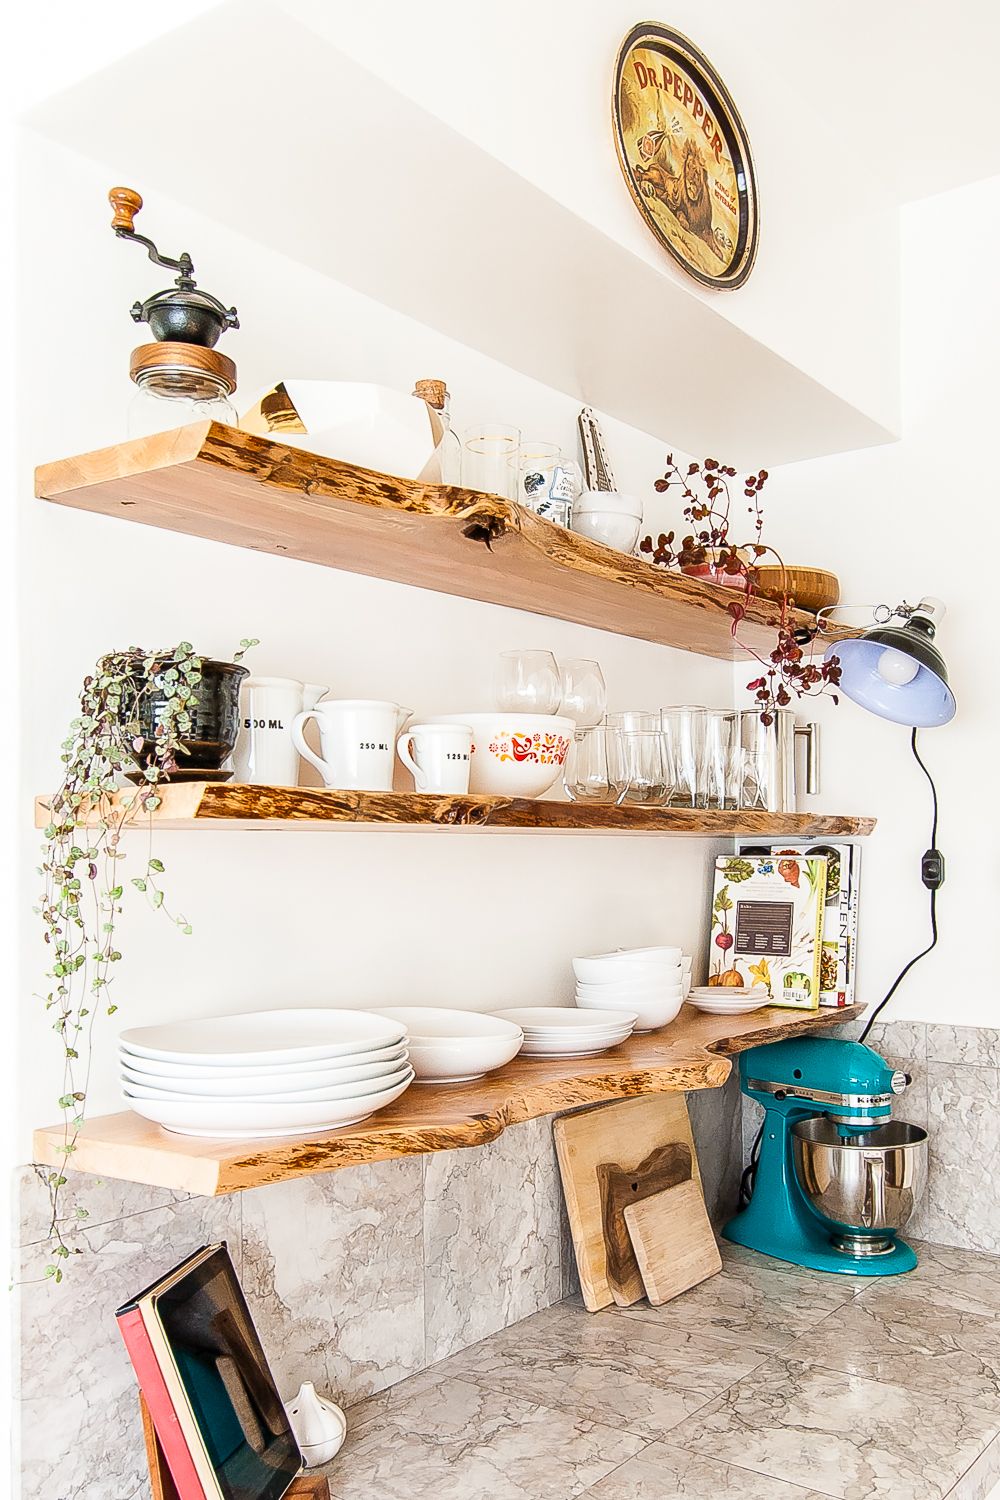 Ideas For Mixing Wall Shelves seattle 2021